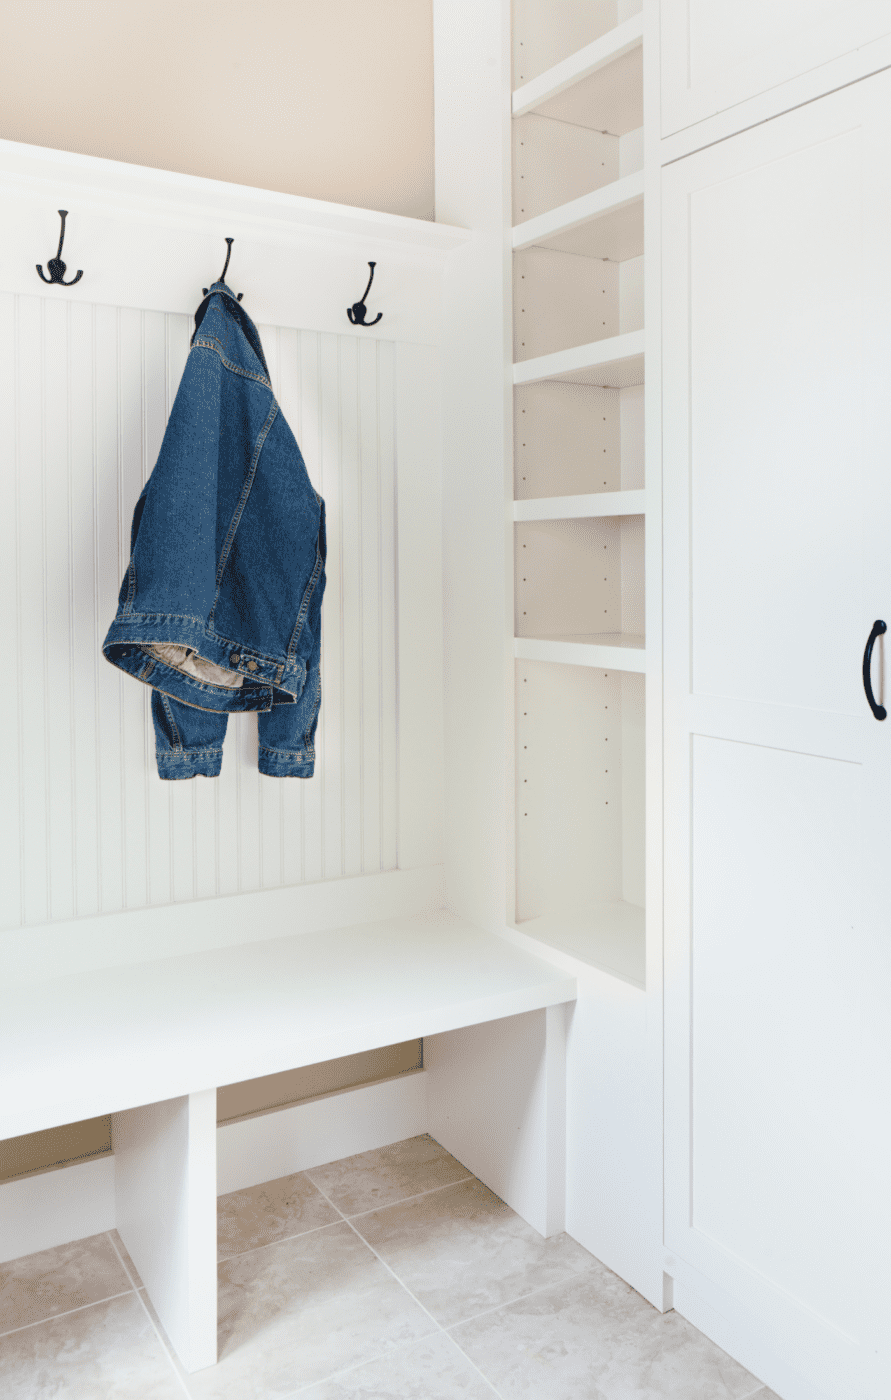 Denim jacket hanging on a wall hook in an entryway.